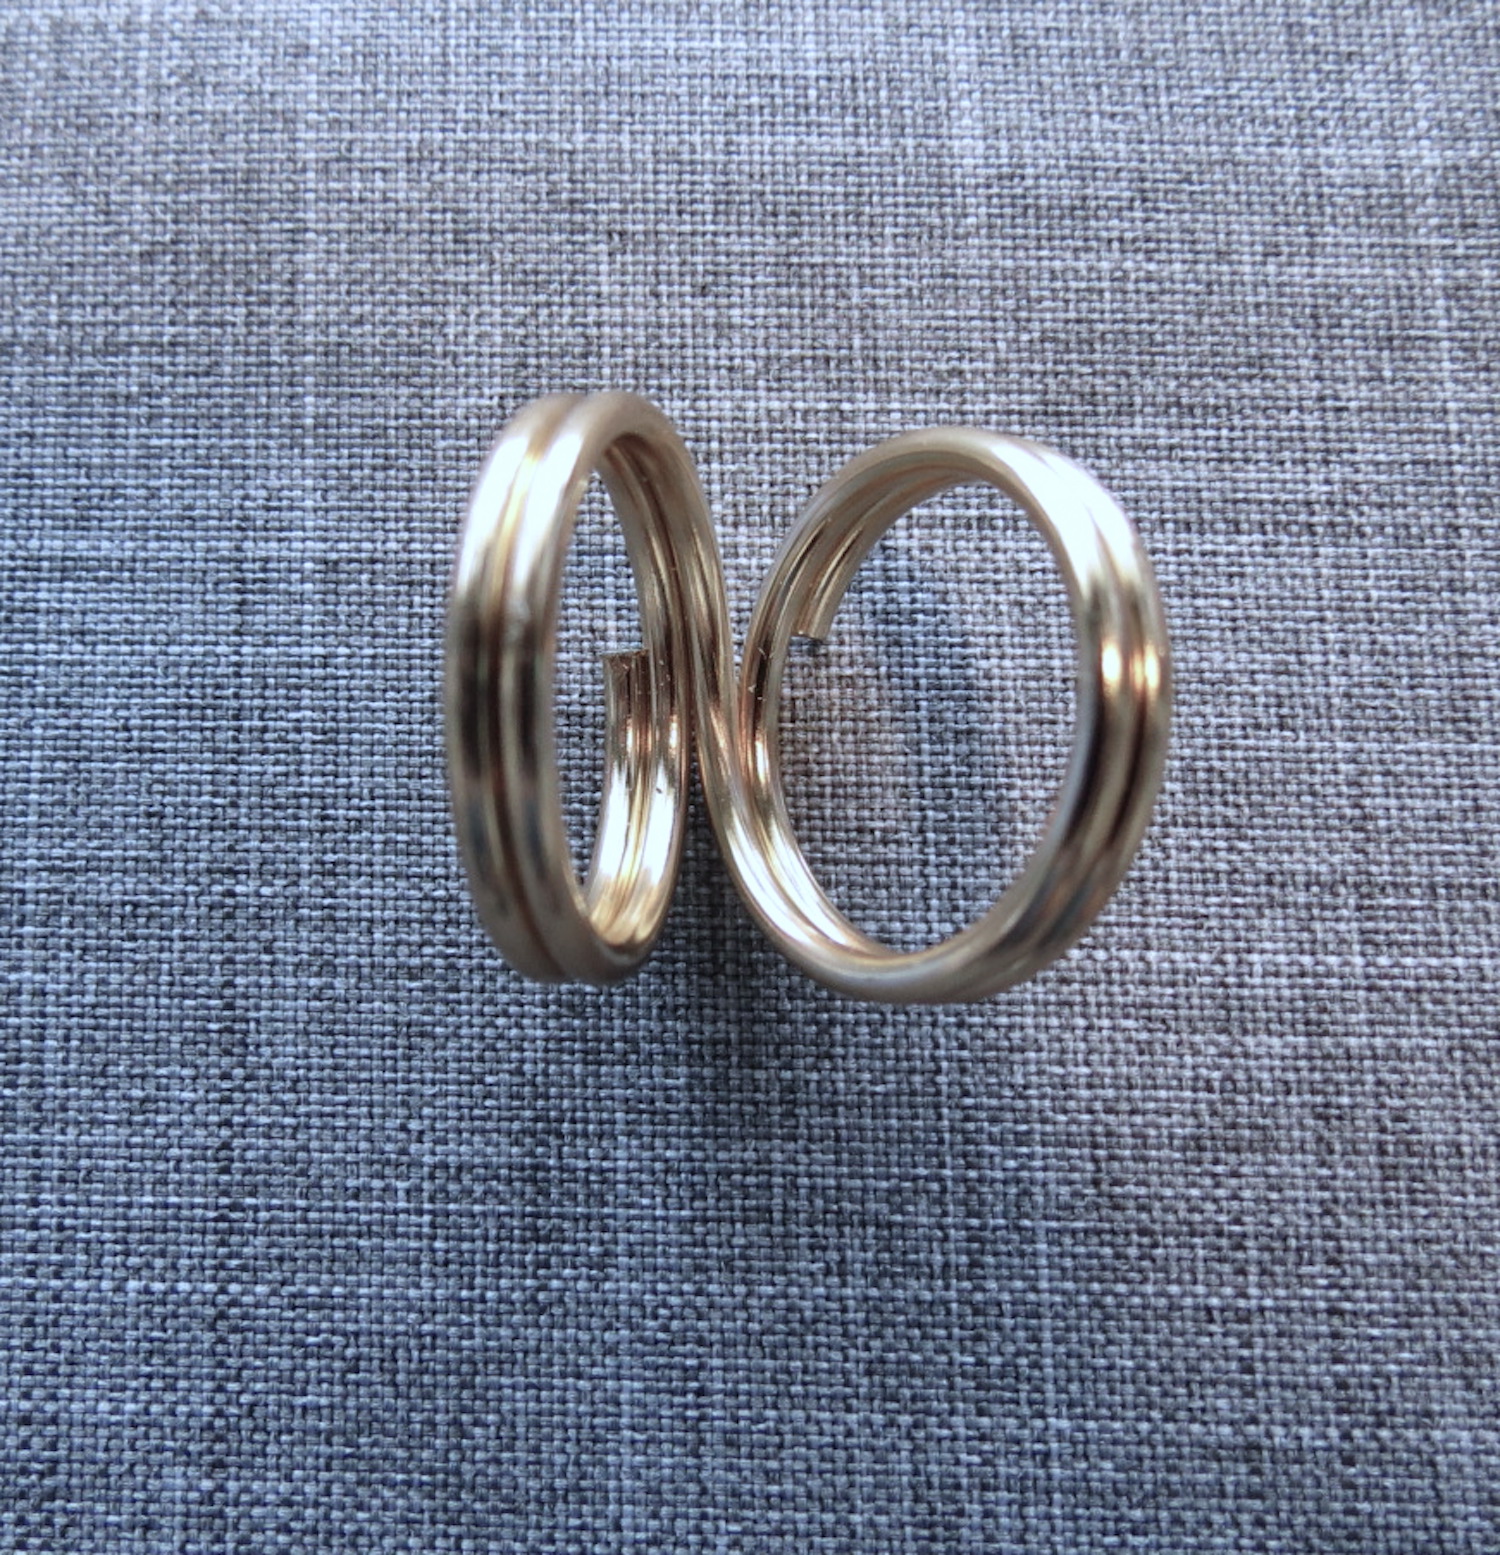 silver scarf ring